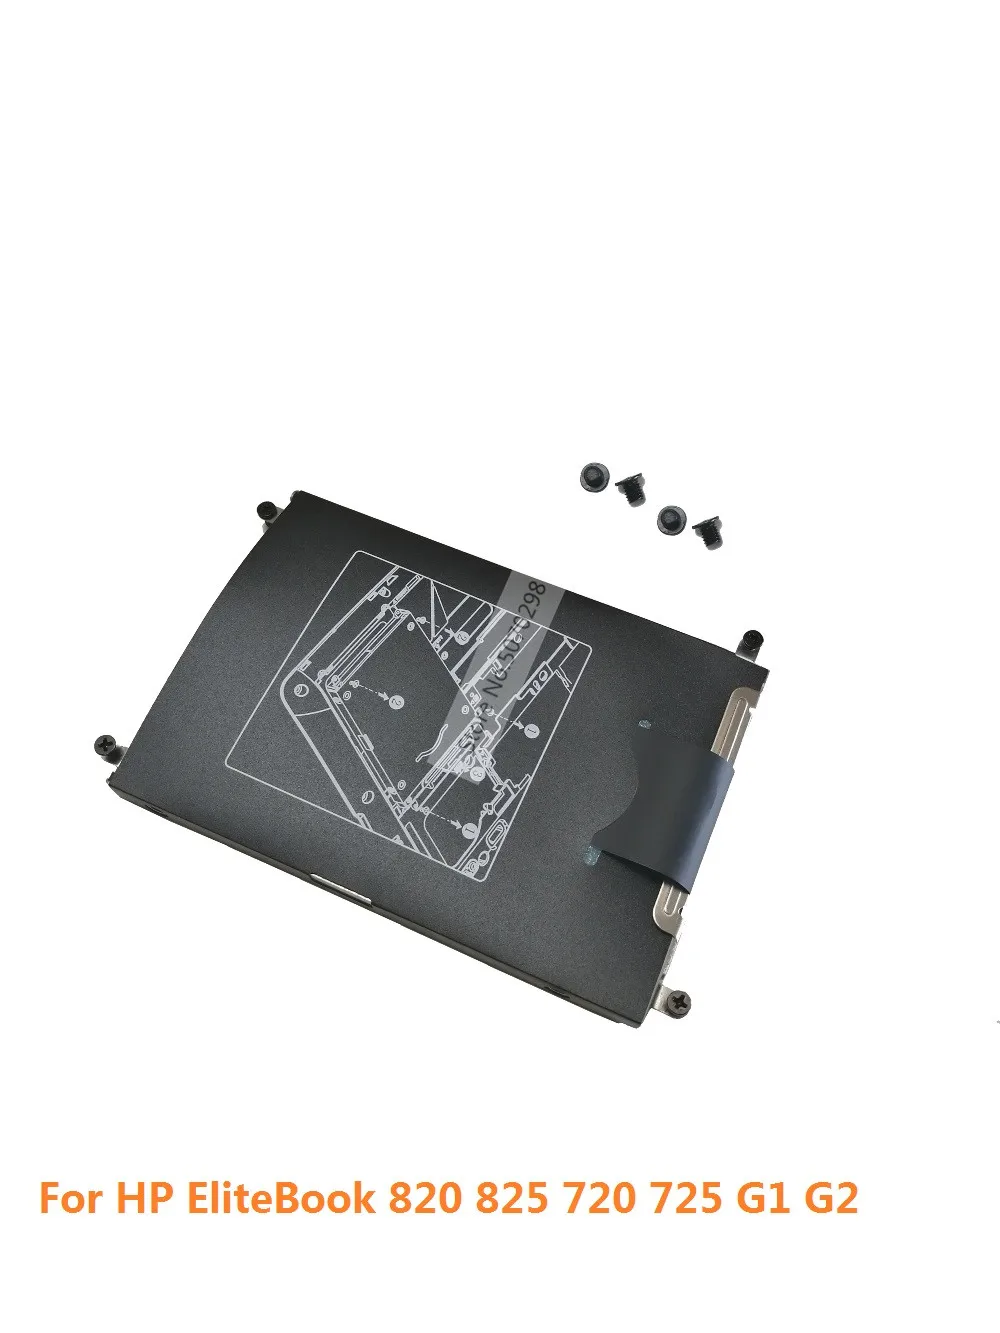 2.5 SATA Hard Disk Drive HDD SSD Caddy Frame Tray Adapter Bracket with Screws for HP EliteBook 820 825 720 725 G1 G2